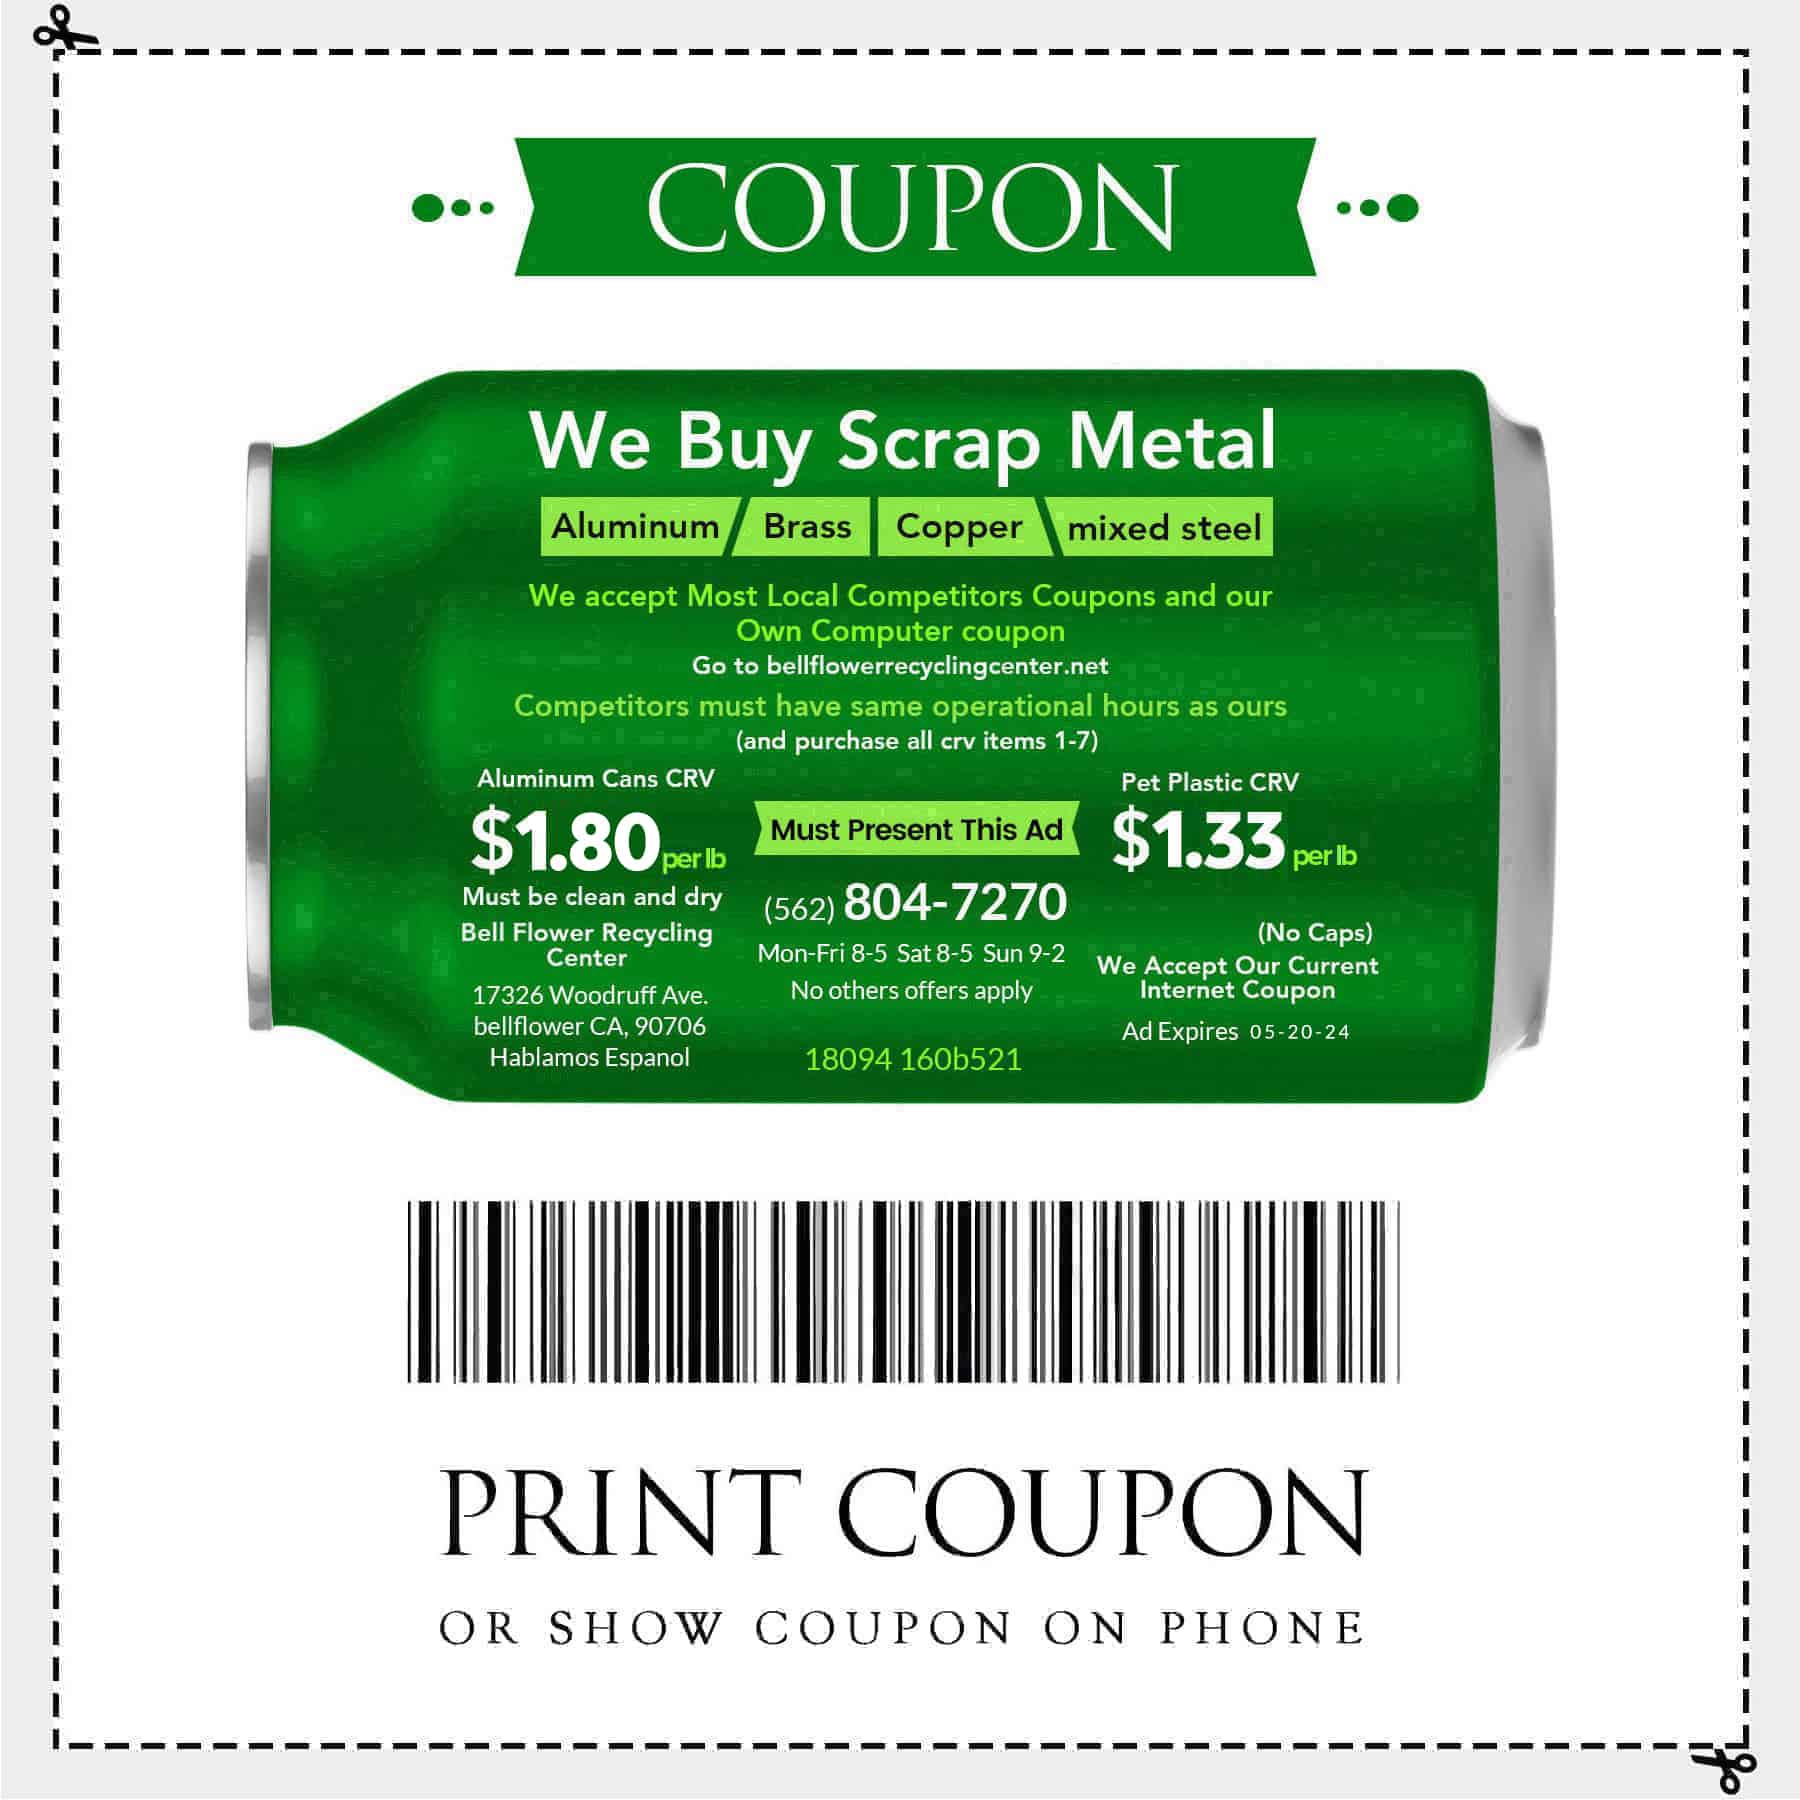 We buy scrap metal Aluminum, Brass, Copper, Mixed steel. We accept most local competitors coupons and our own computer coupon. Competitors must have same operational hours as ours (and purchase all crv items 1-7). One Must present this add. Aluminum Cans CRV $1.80 per lb and Pet Plastic CRV $1.33 per lb.